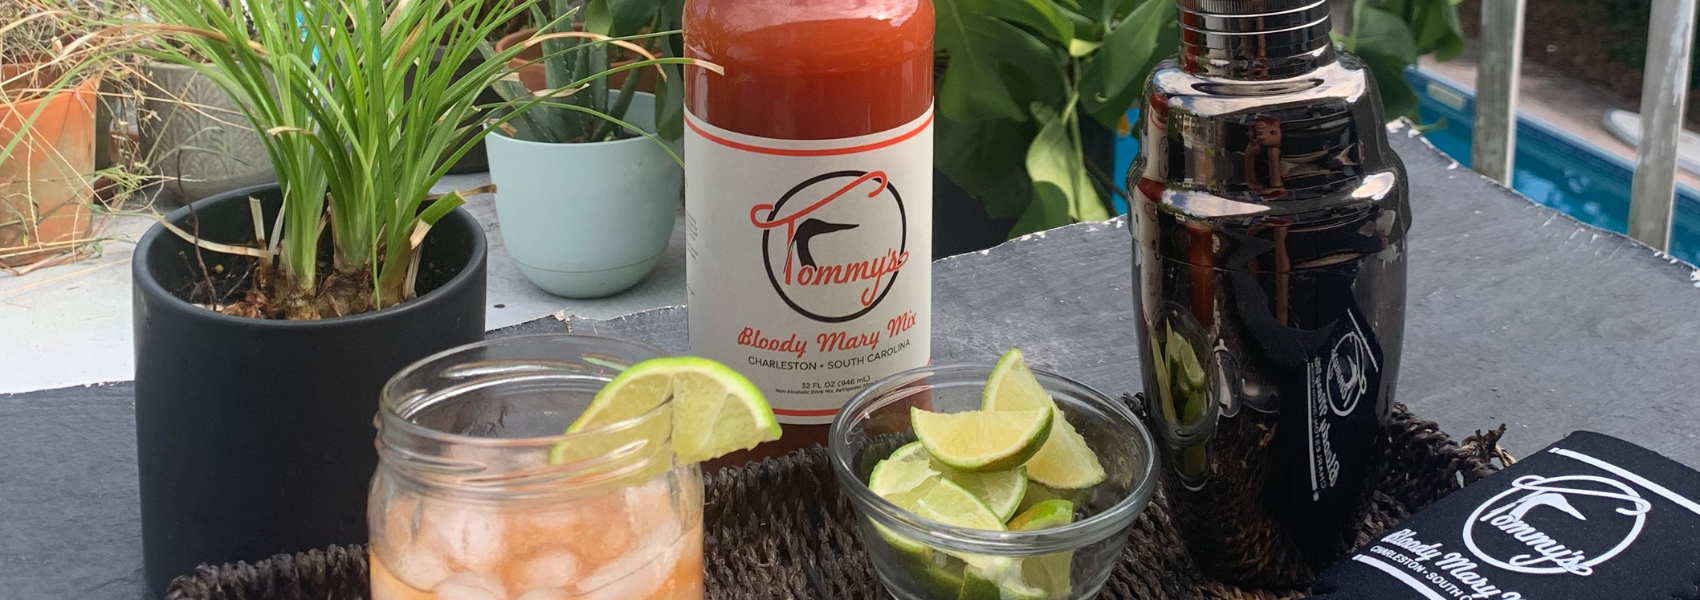 Tommy's Bloody Mary Mix at a bar set up for bloody marys